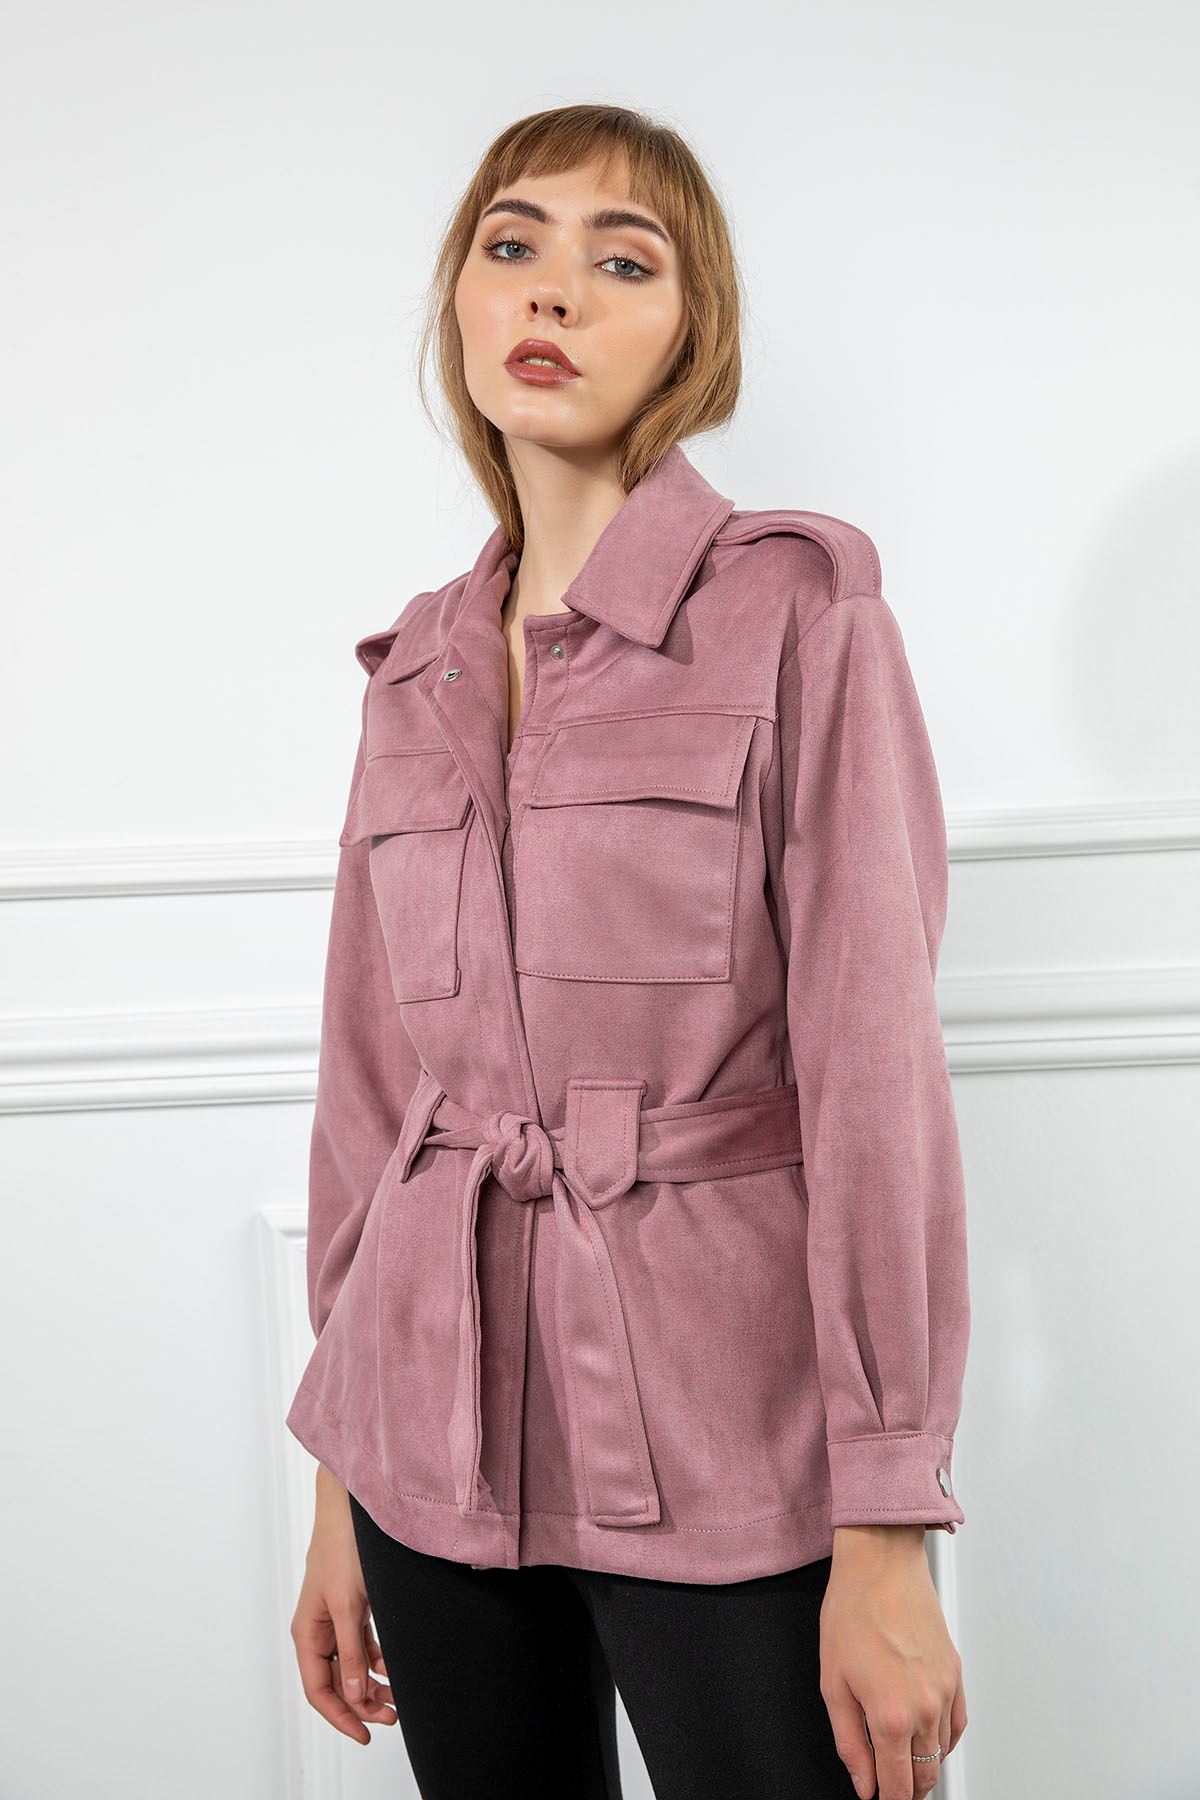 Suede Fabric Long Sleeve Shirt Collar Full Fit Belted Women Jacket - Light Pink